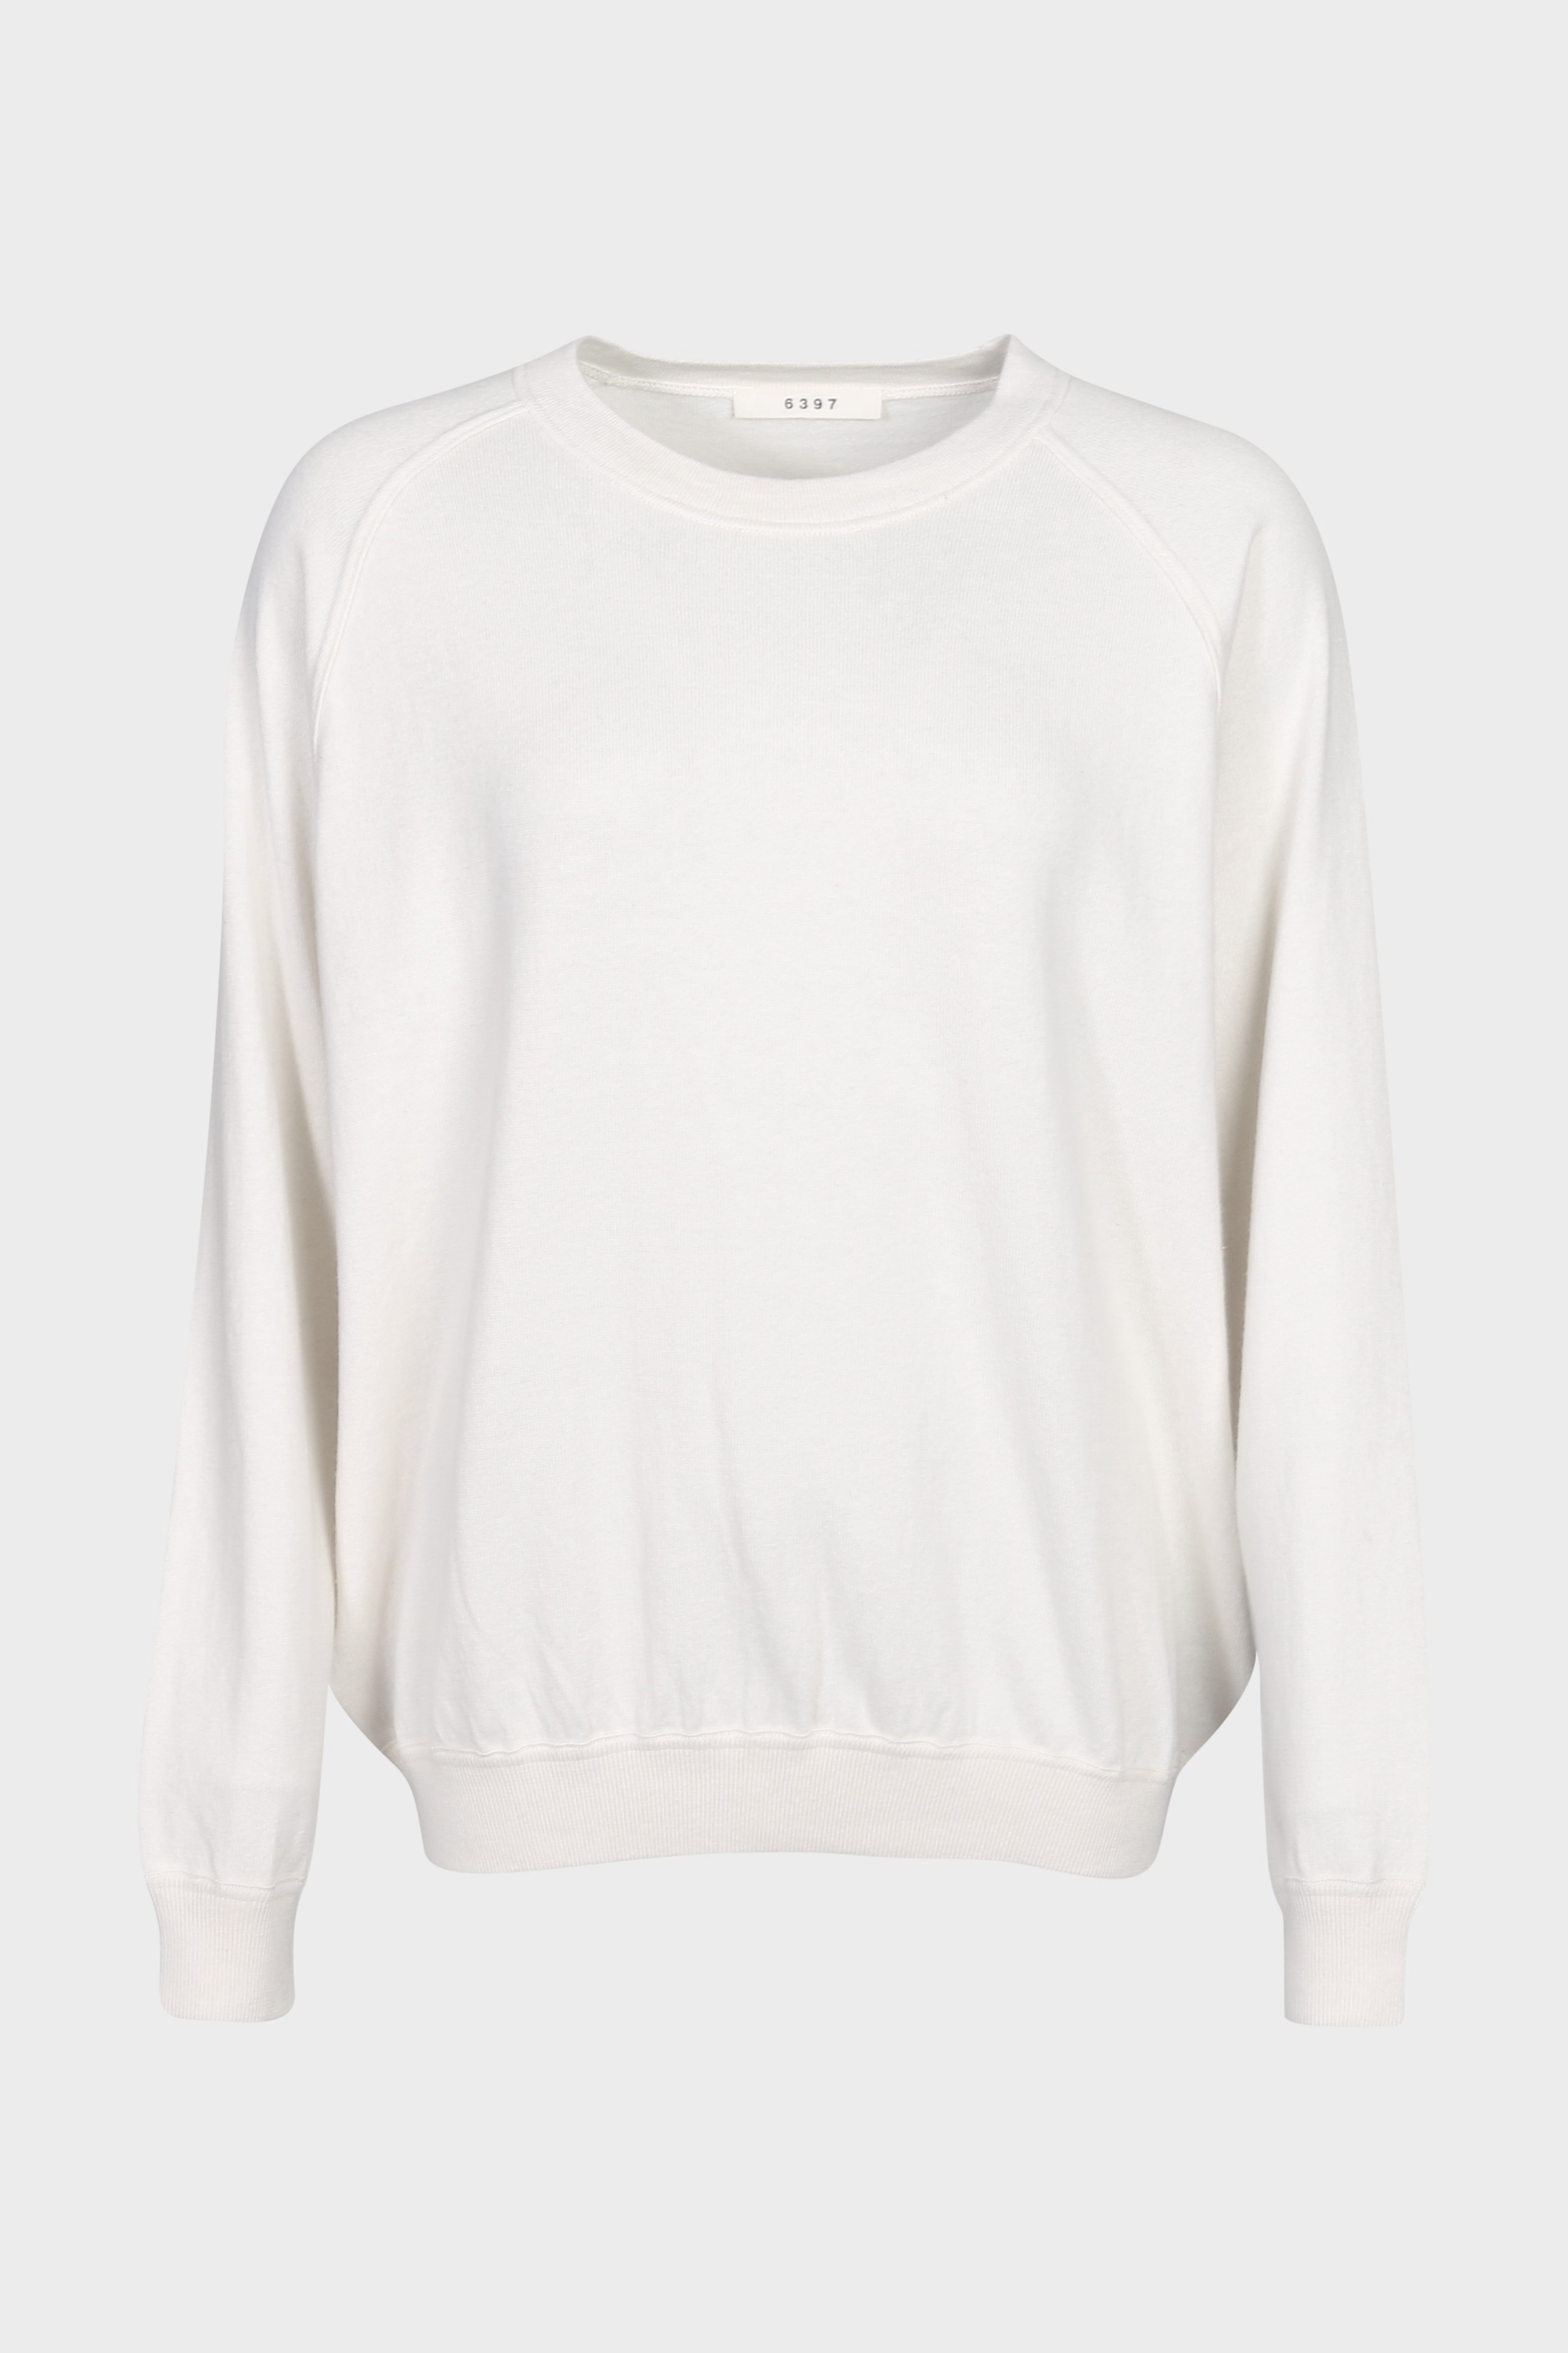 6397 Knit Pullover in Ivory XS